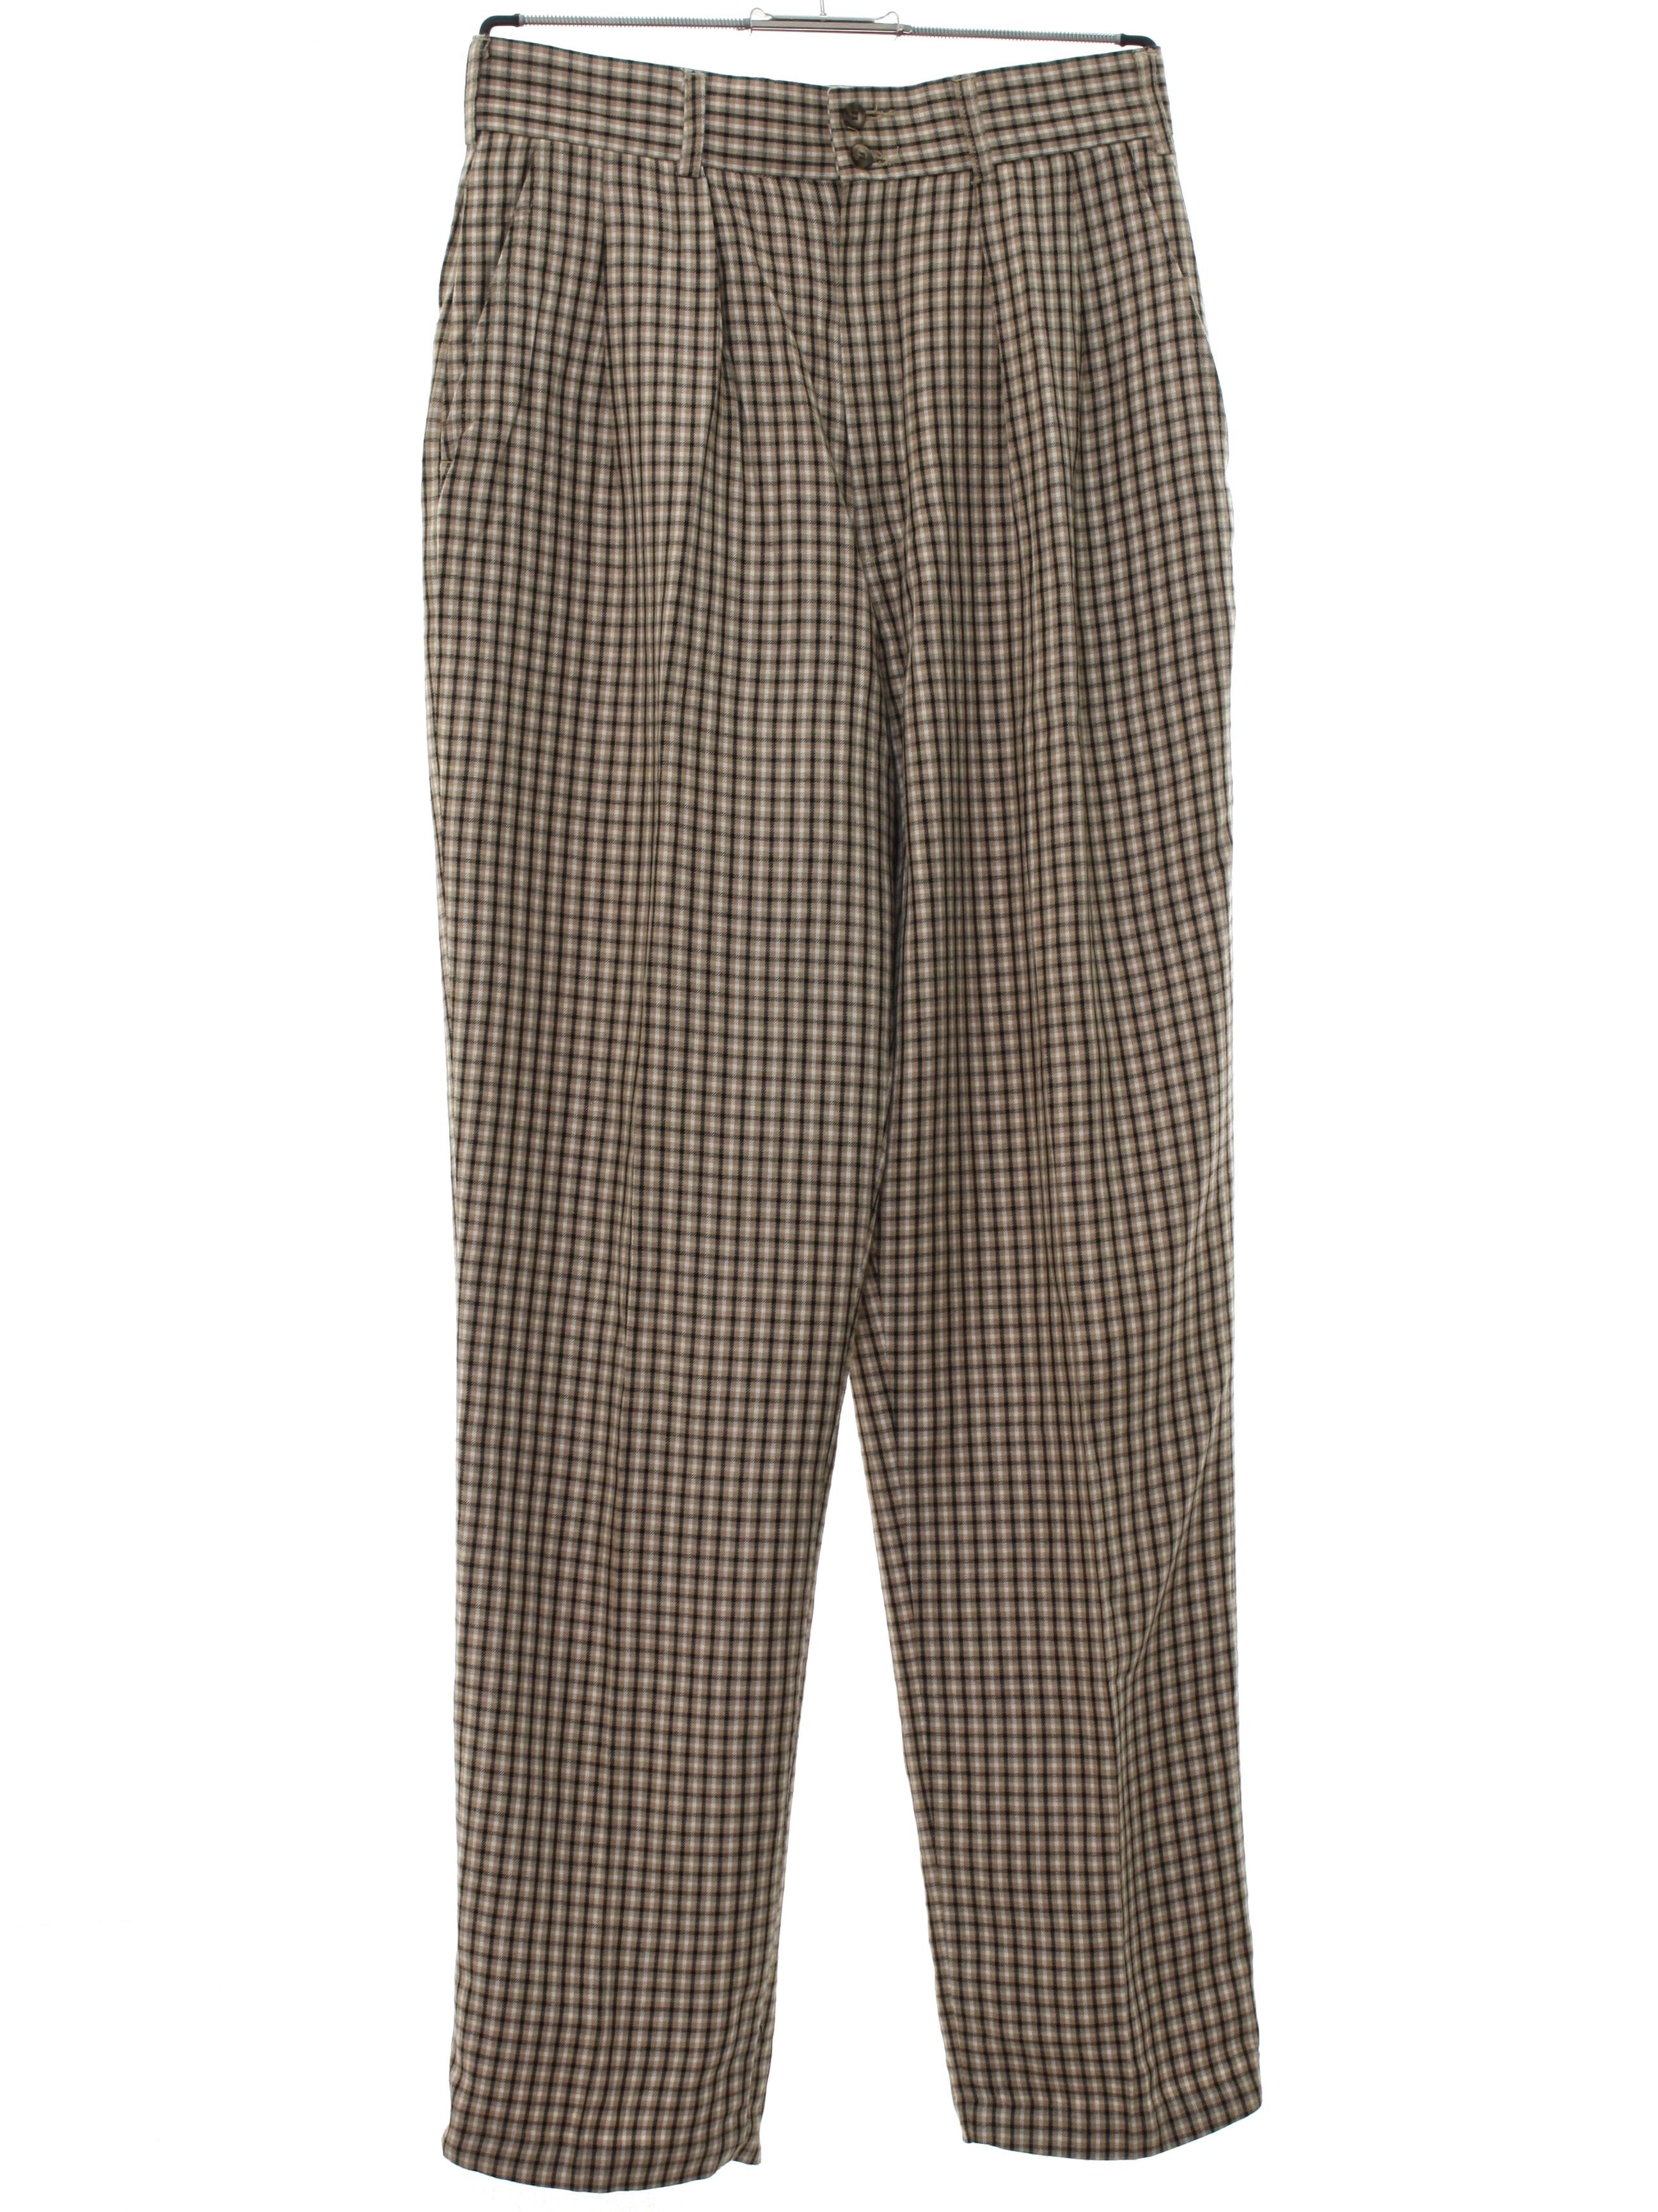 Vintage 80s Pants: 80s -Ruff Hewn- Mens tan with white and black plaid ...